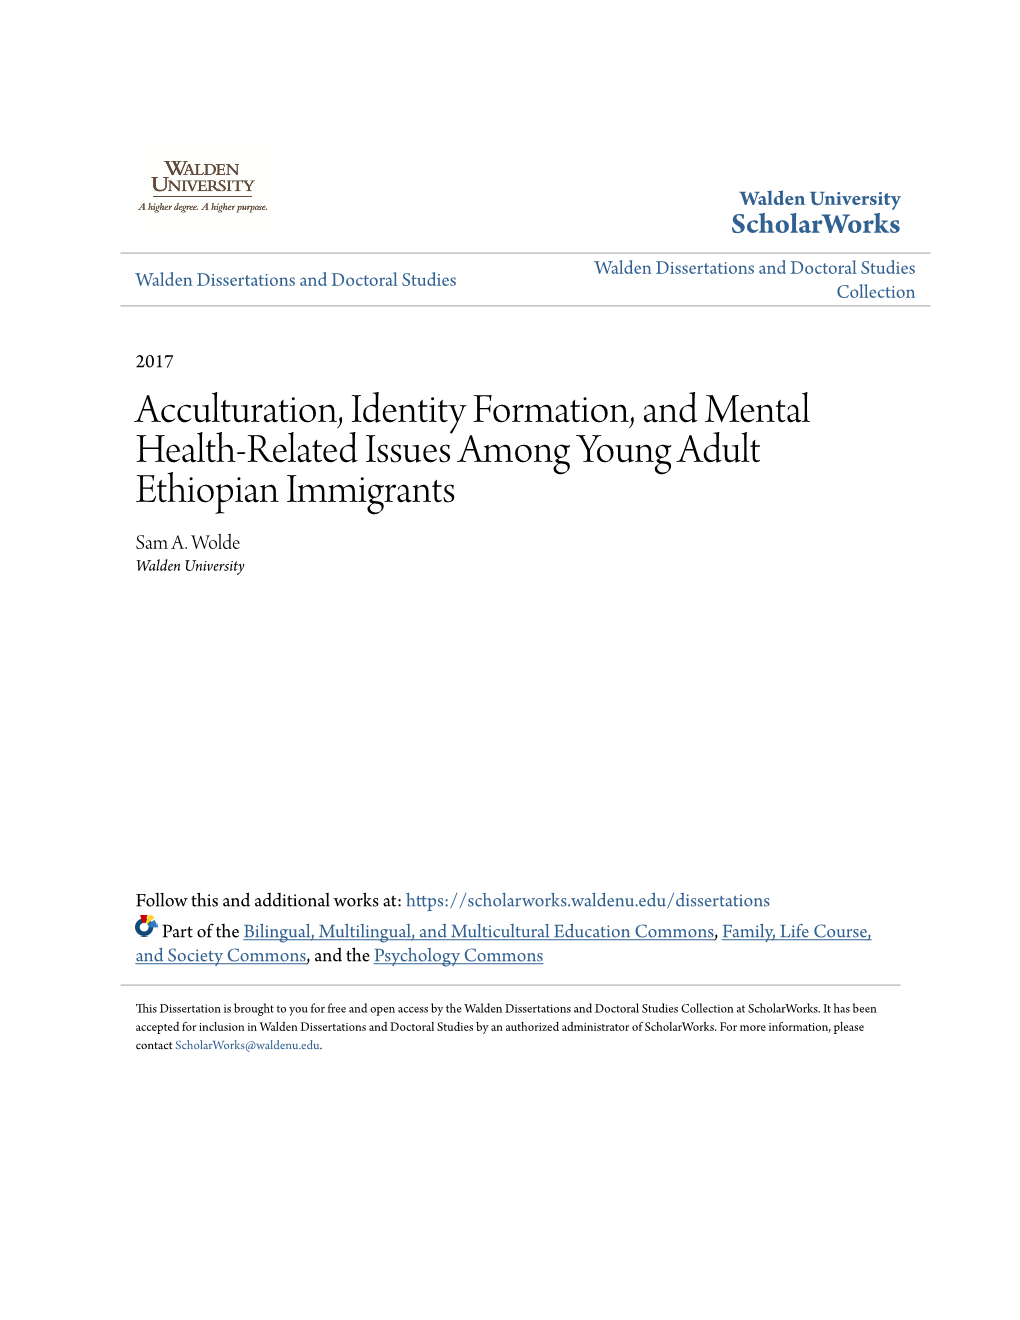 Acculturation, Identity Formation, and Mental Health-Related Issues Among Young Adult Ethiopian Immigrants Sam A